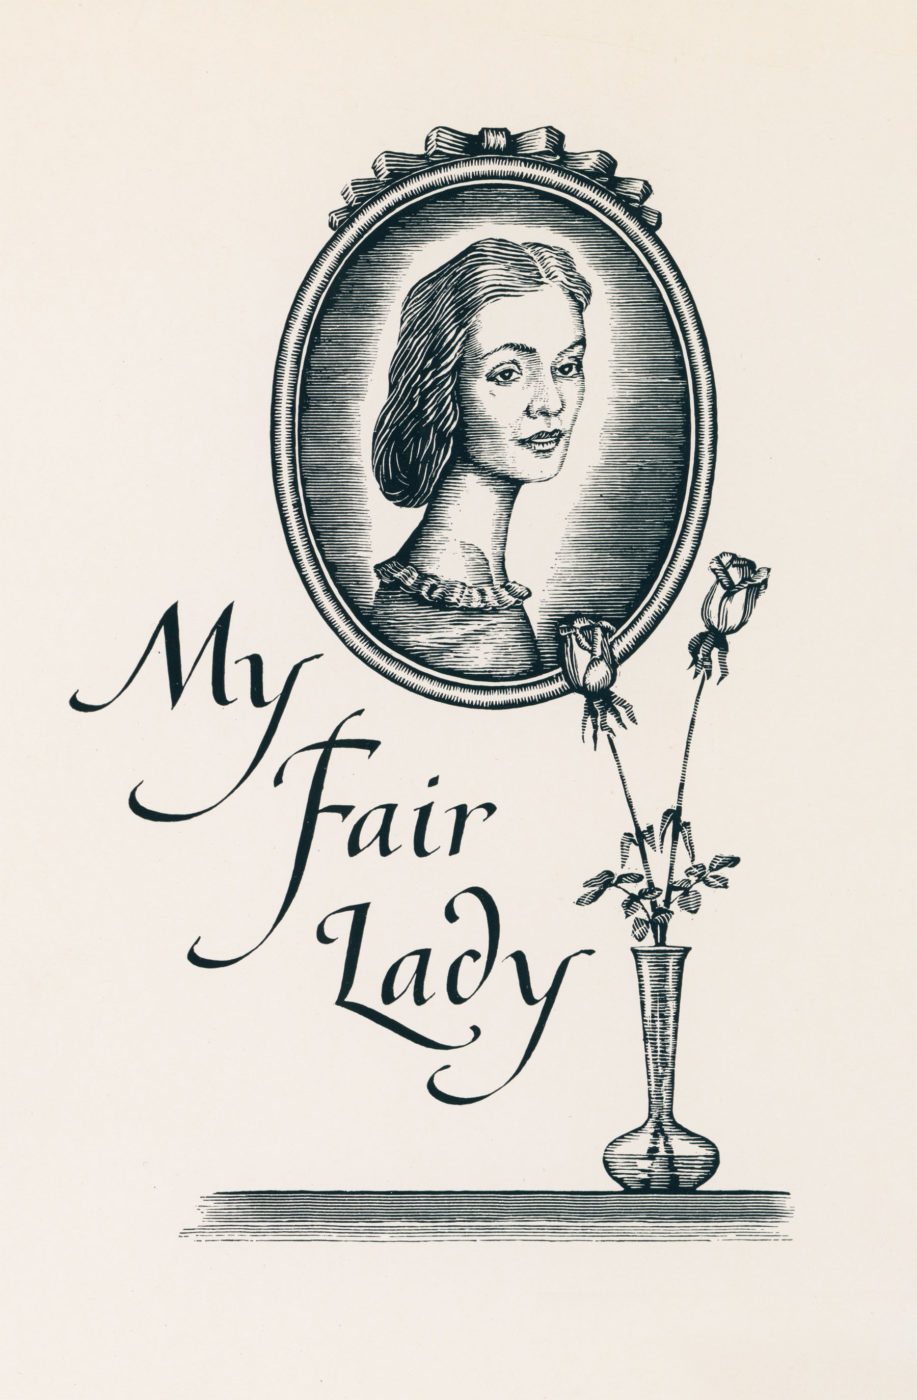 100 Poems About People: My Fair Lady